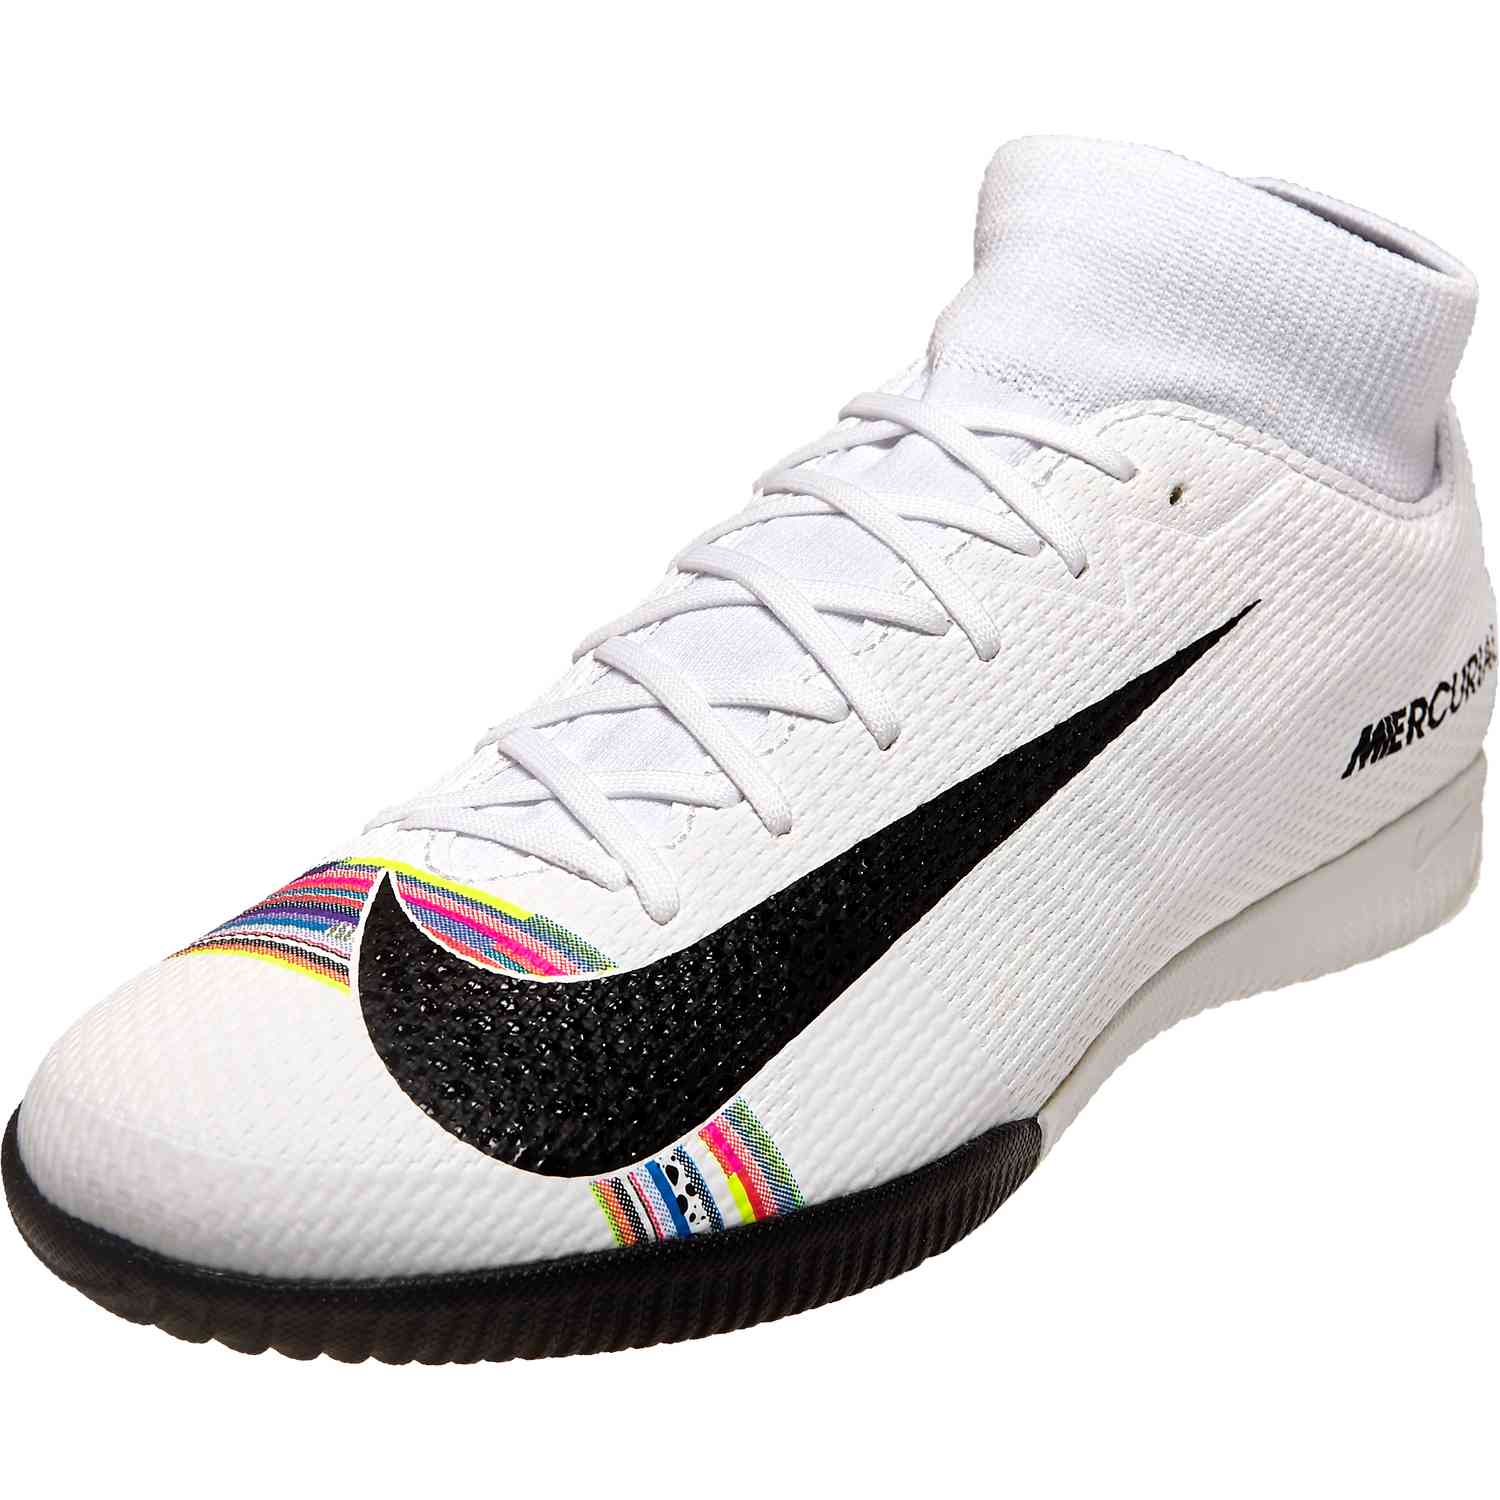 JR SUPERFLY 6 ACADEMY GS MG achat pas cher GO Sport